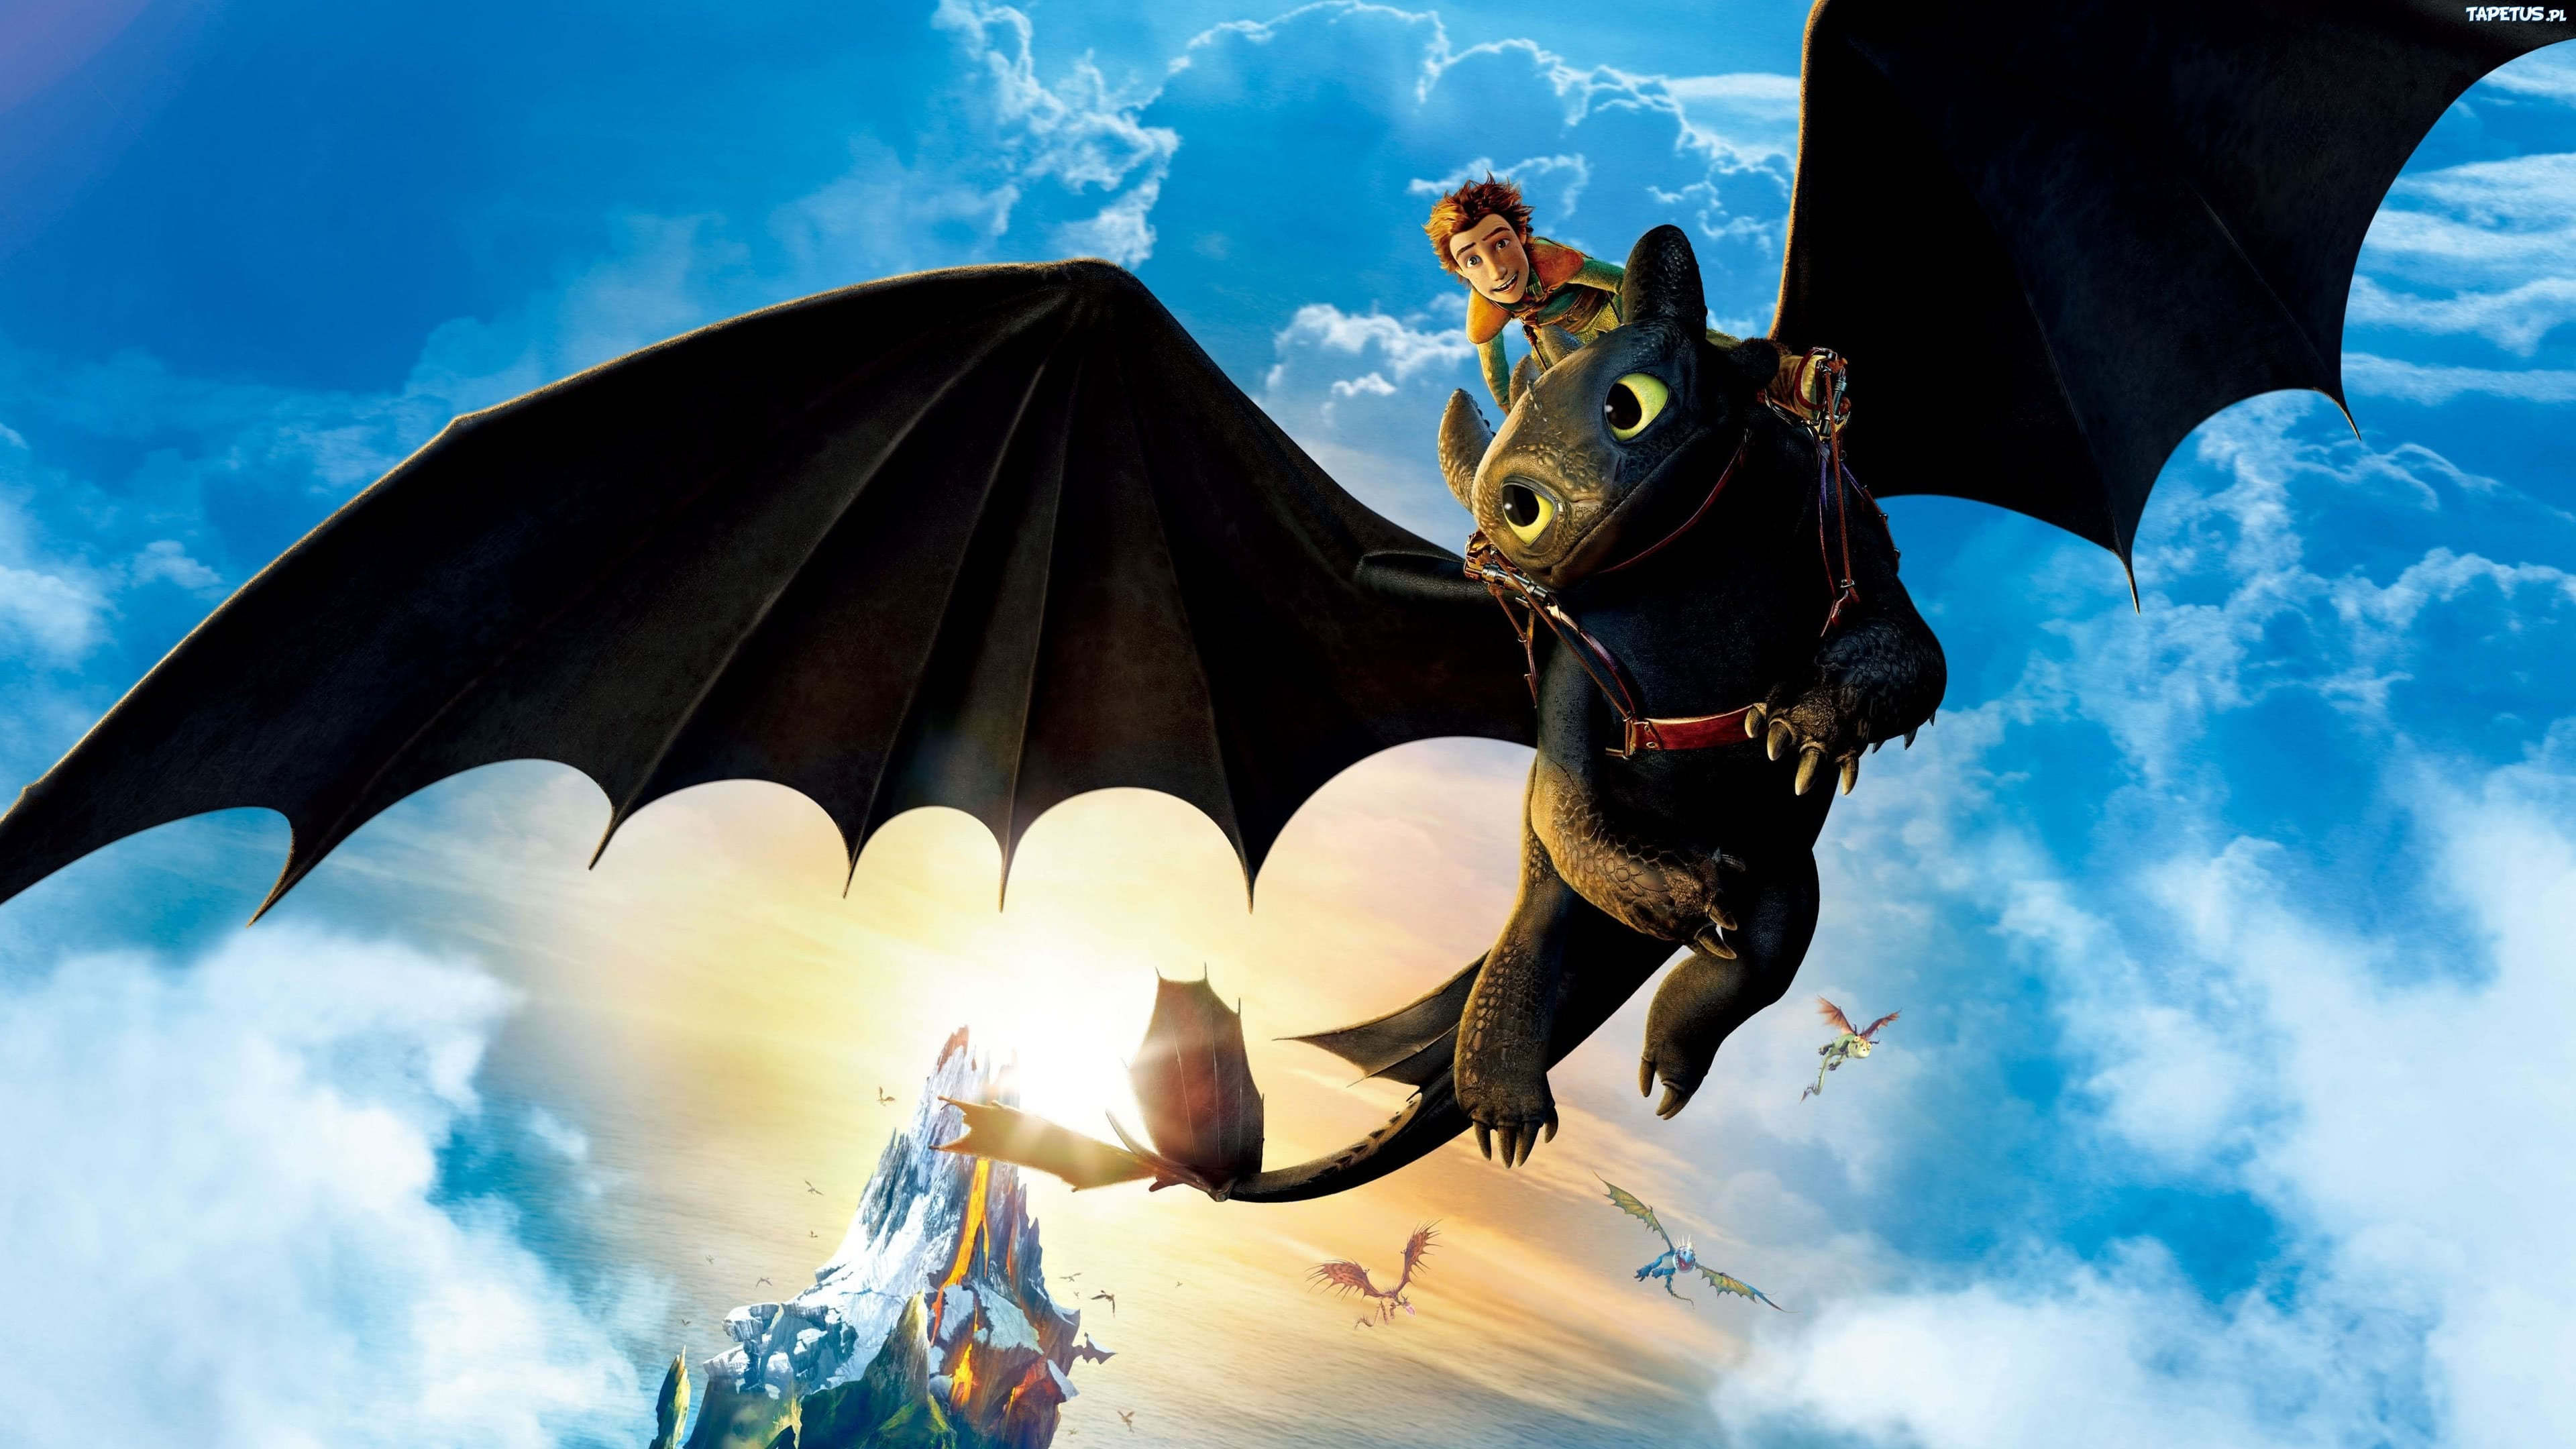 How To Train Your Dragon Hiccup Riding Toothless 4k - HD Wallpaper 